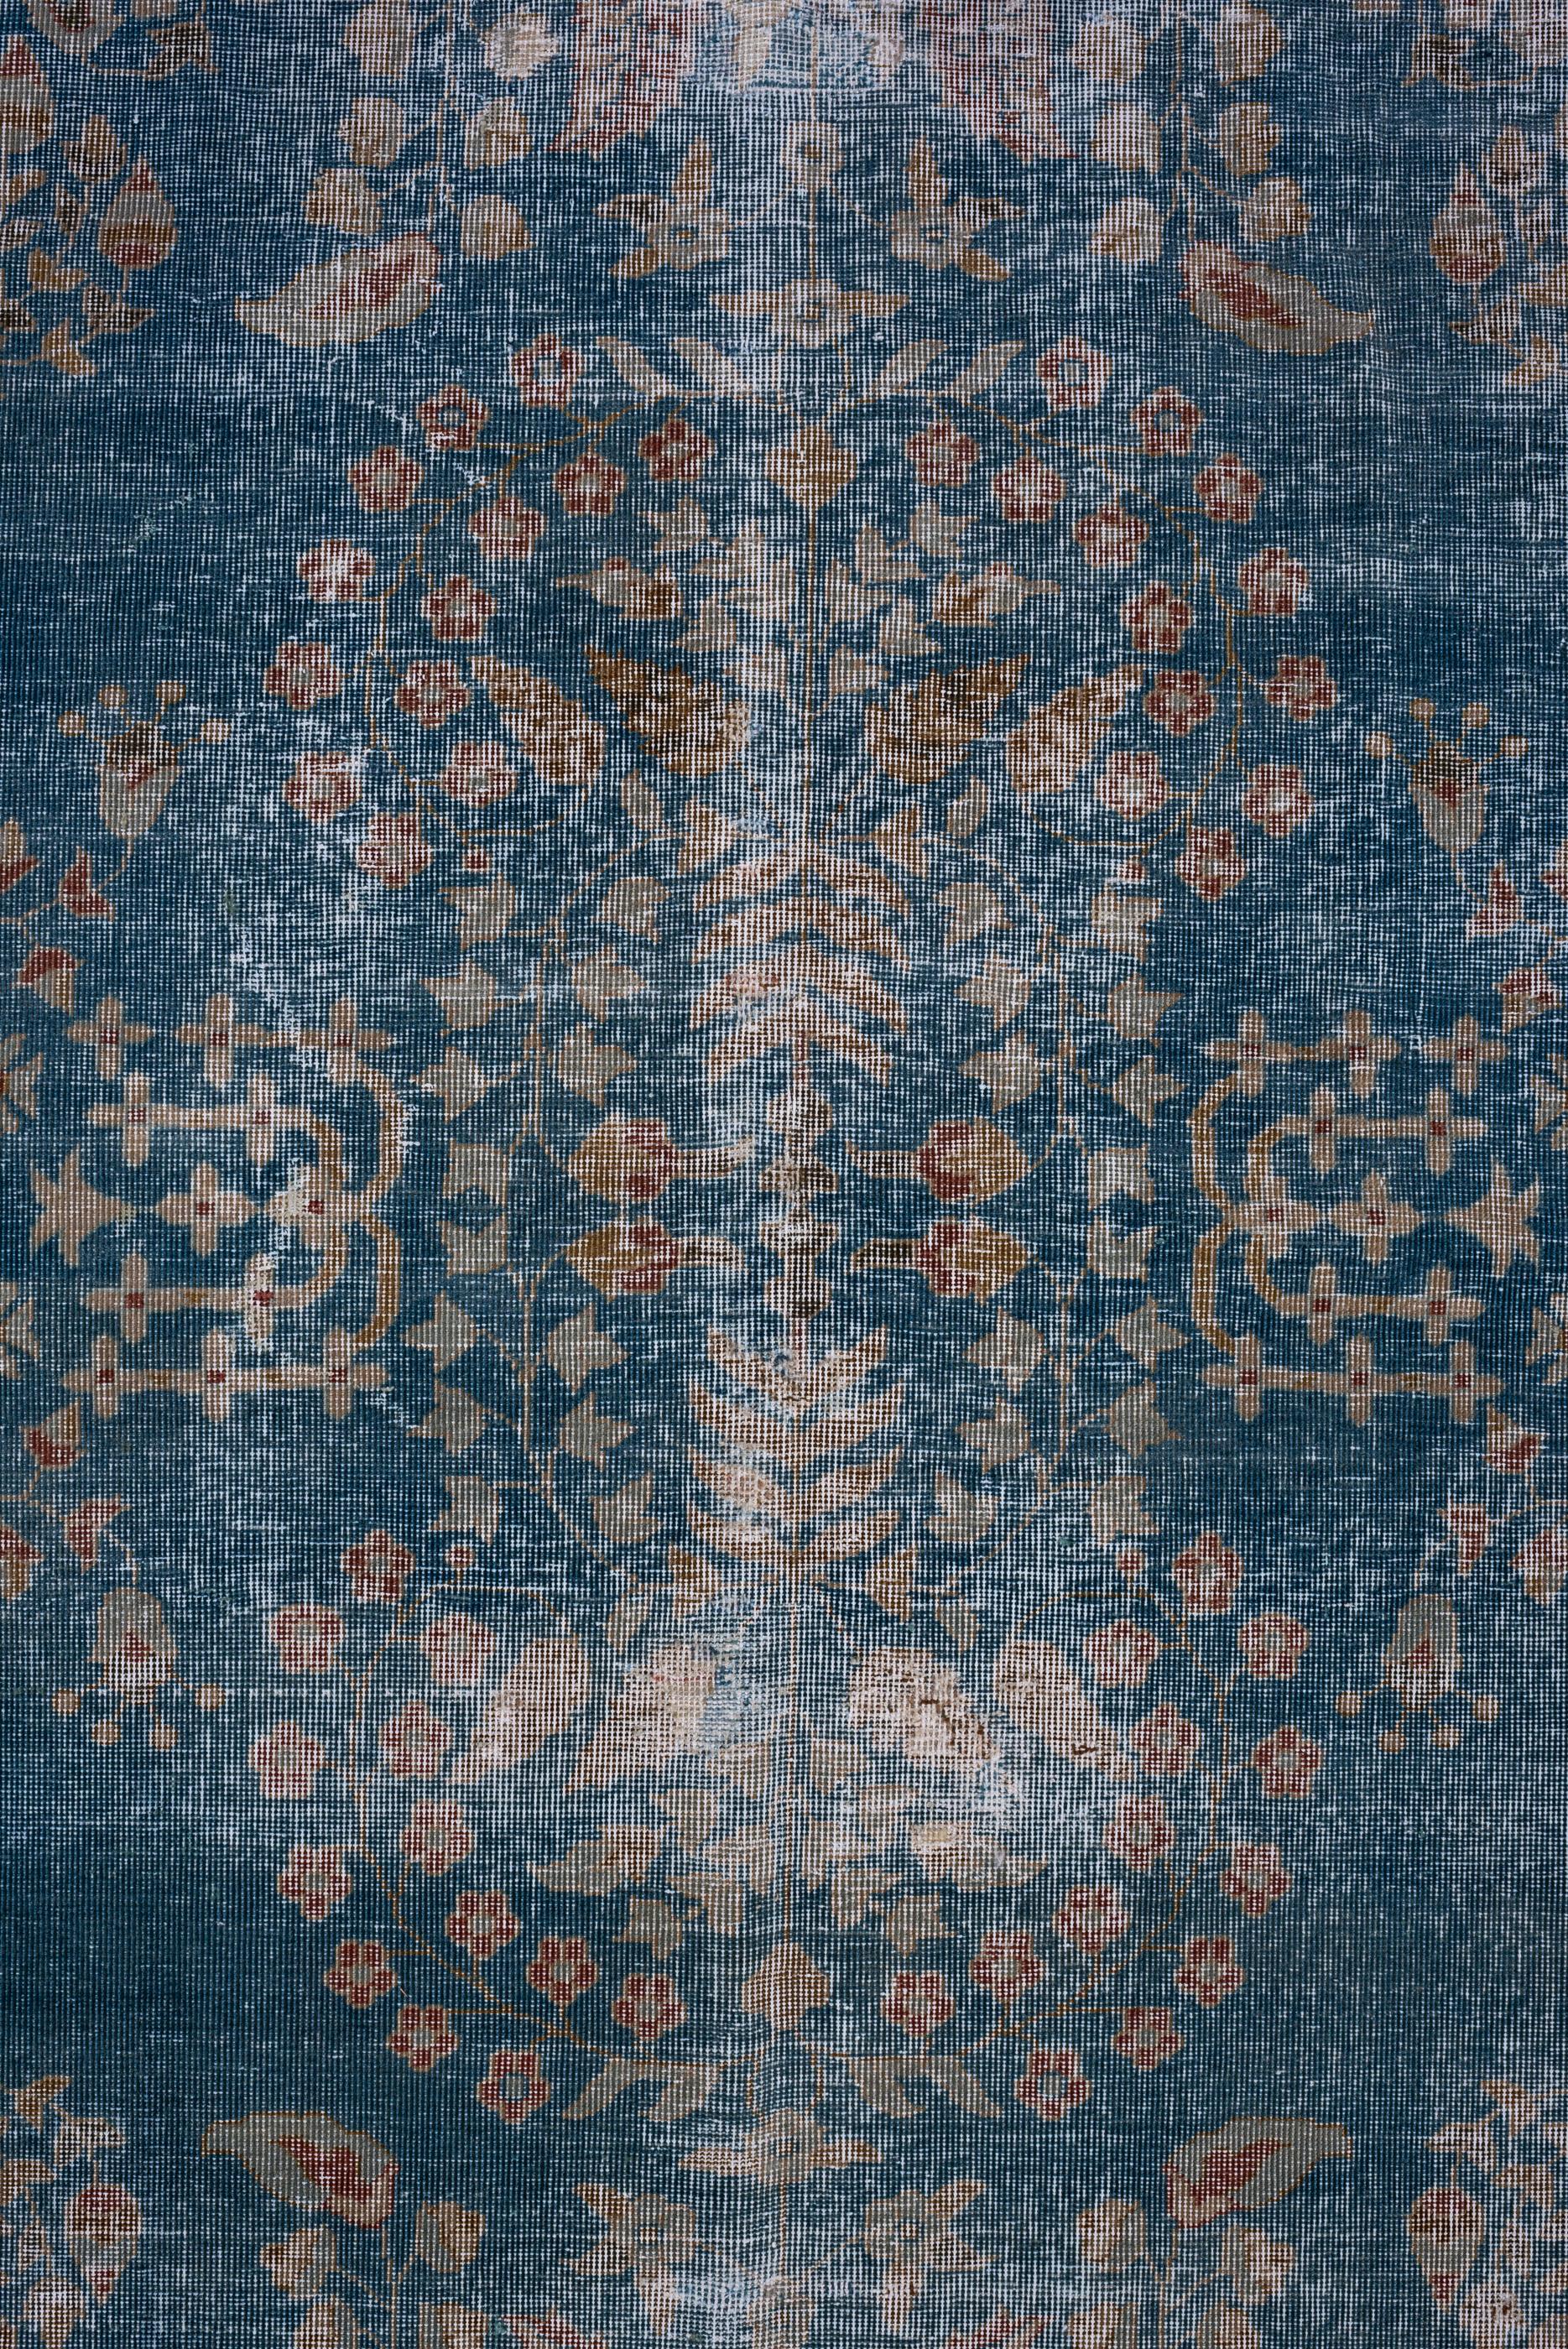 Hand-Knotted Distressed Kerman Rug with Royal Blue Field and Floral Design, Circa 1920's